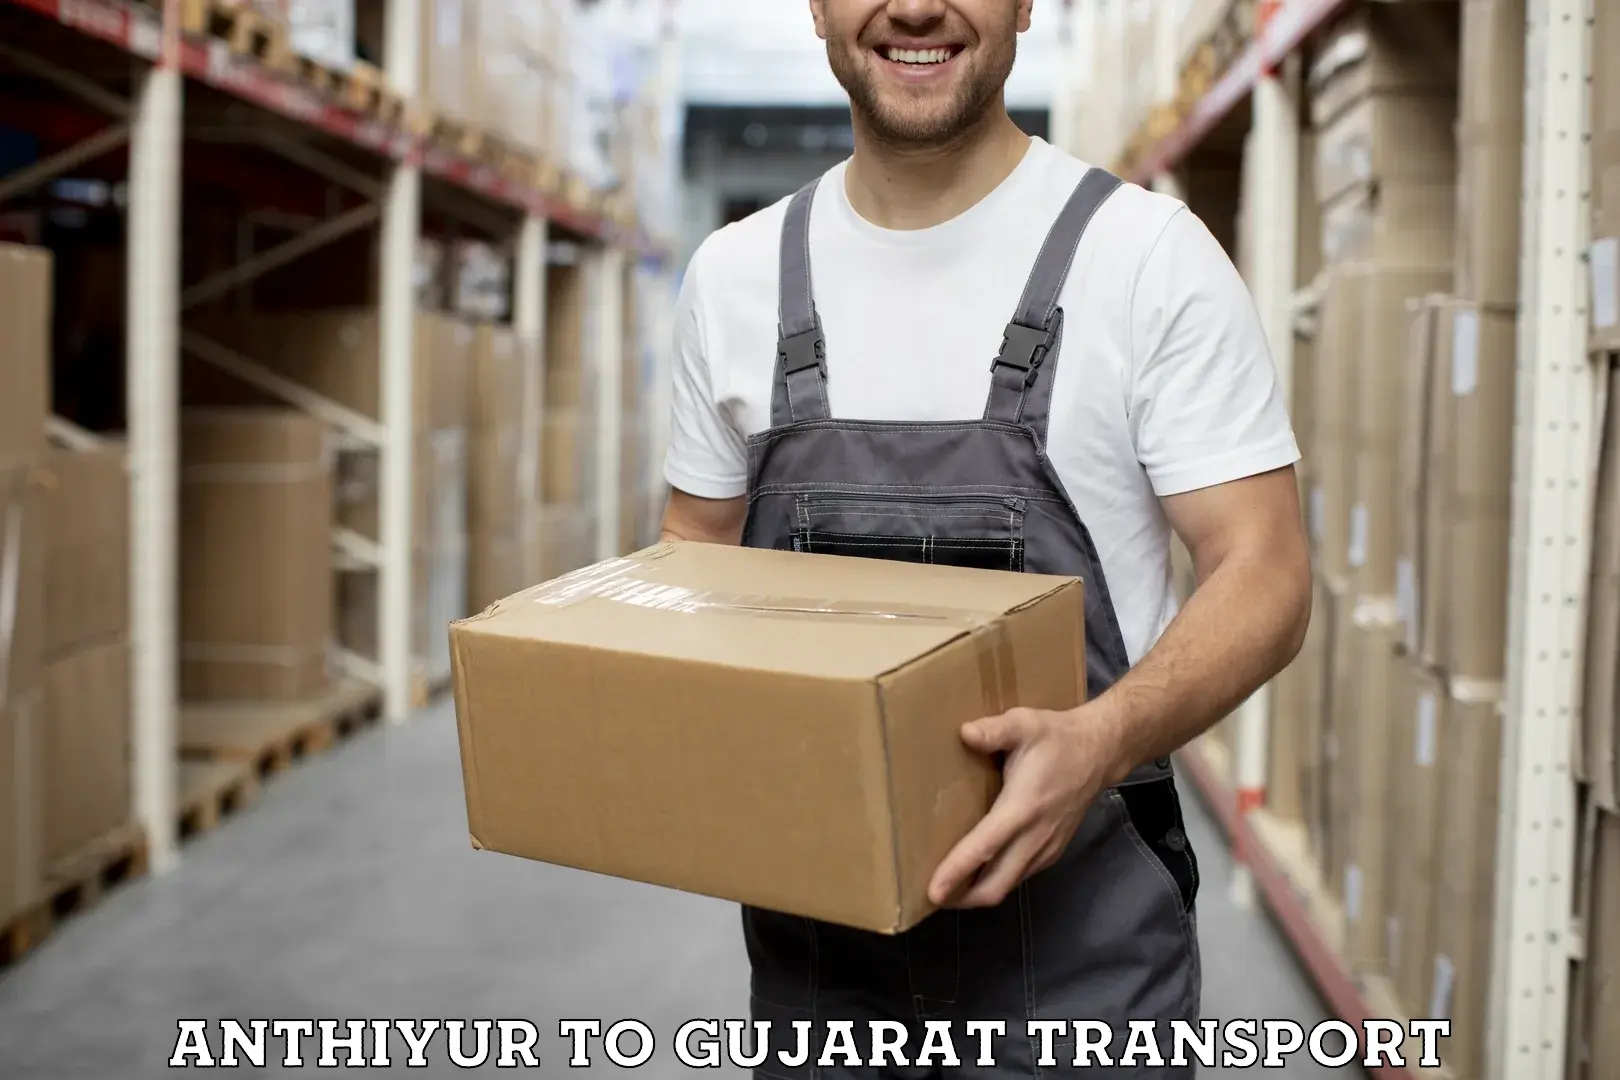 Commercial transport service Anthiyur to Gujarat